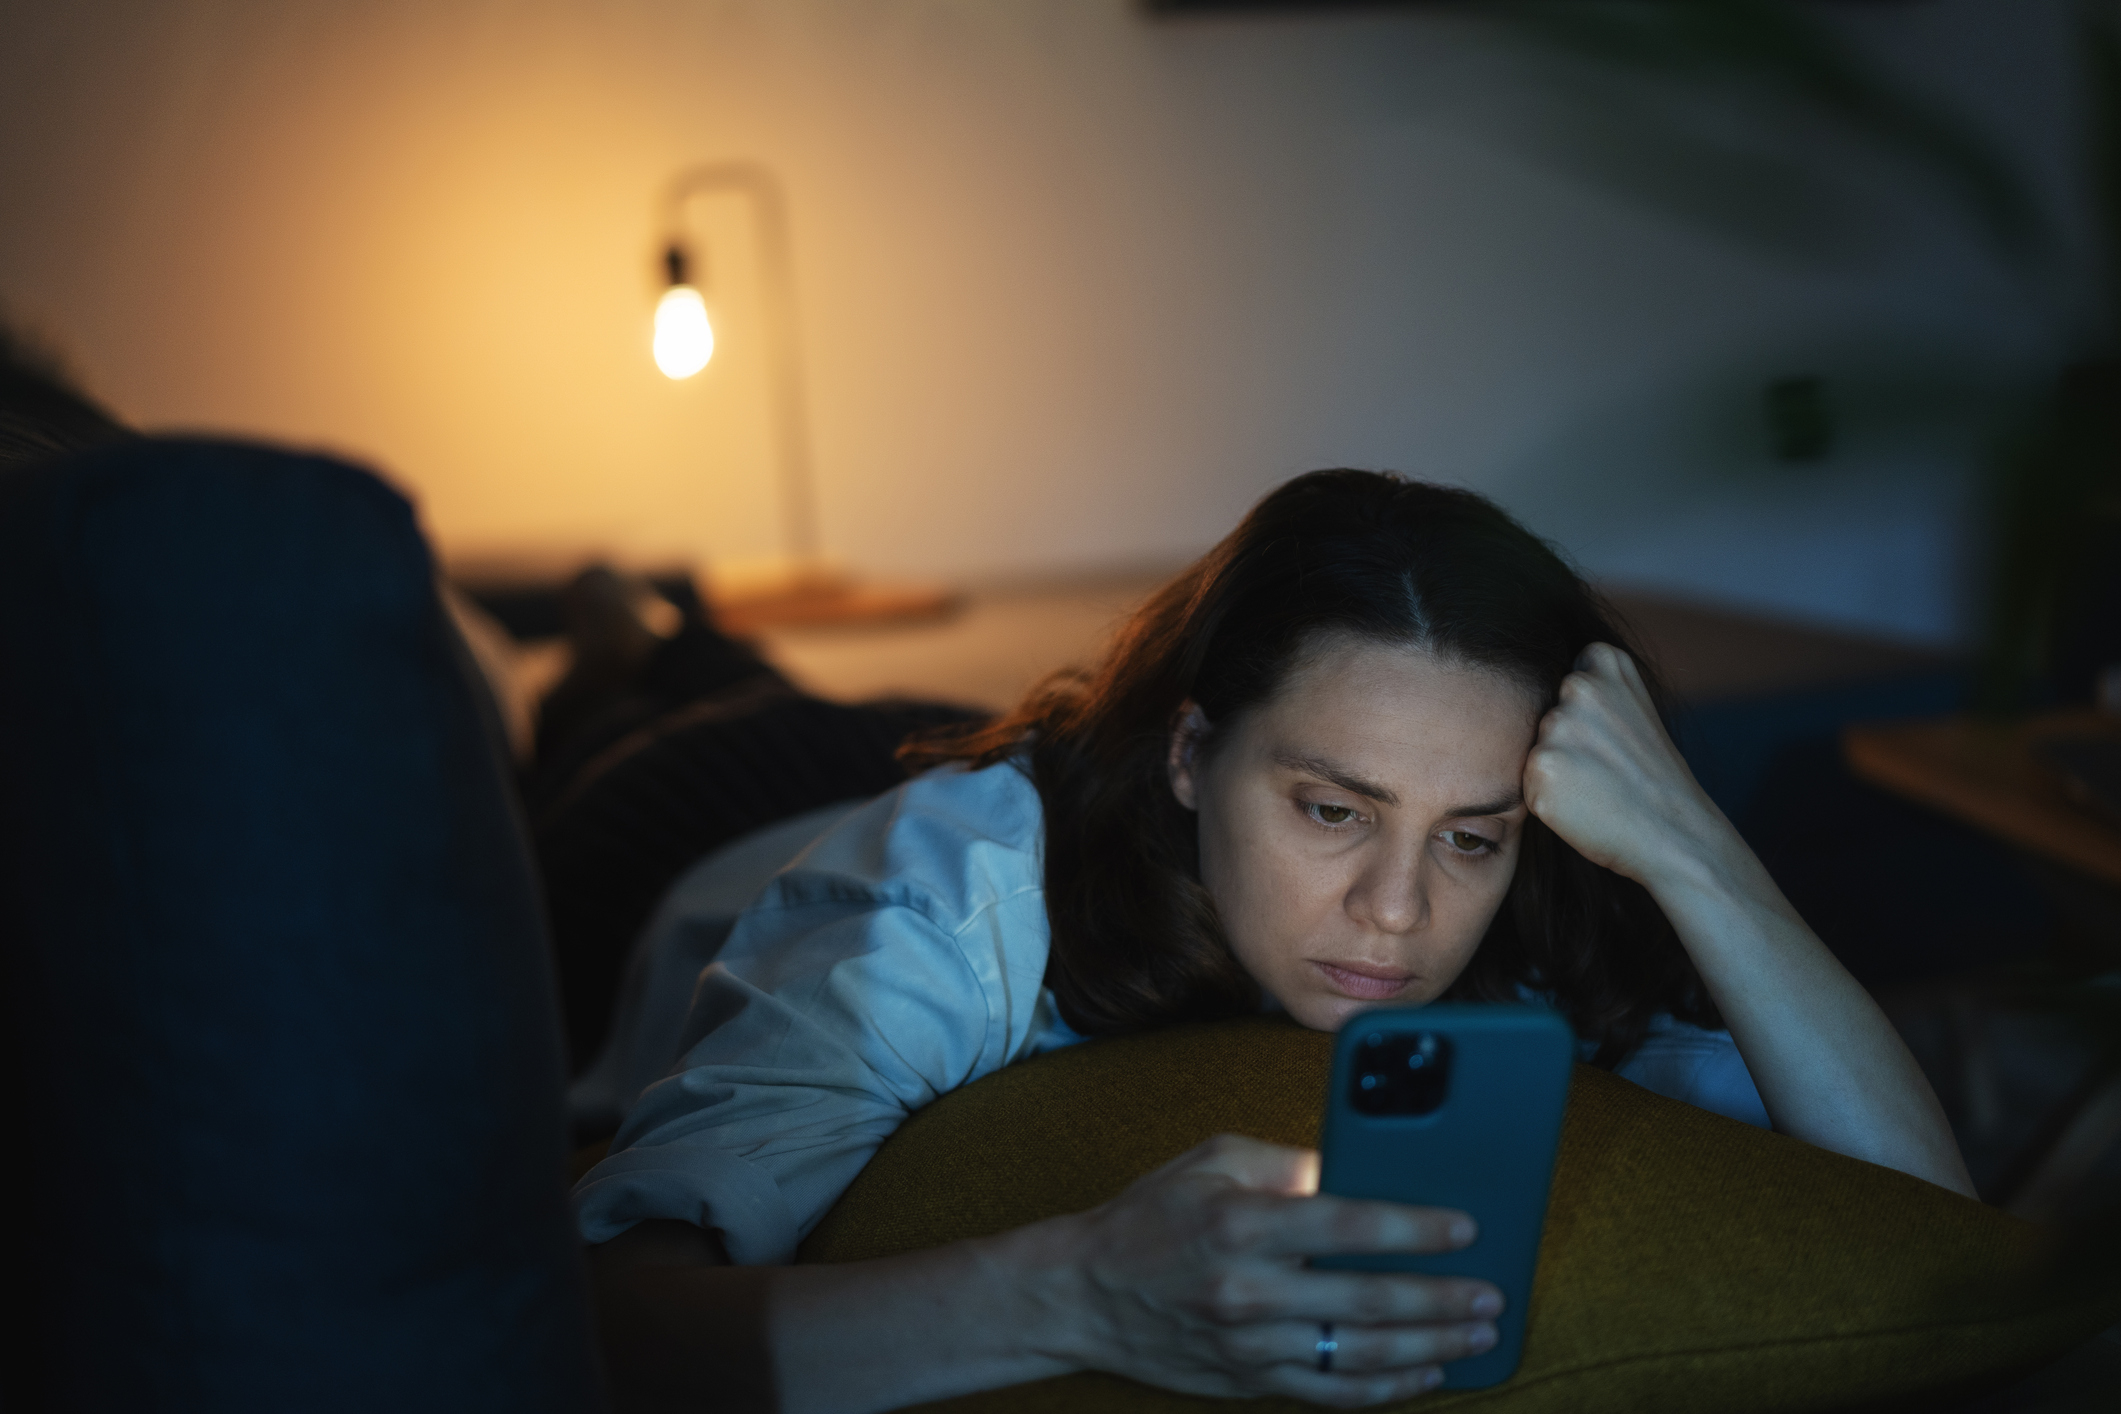 Woman lying on a couch looking at her smartphone with a concerned expression